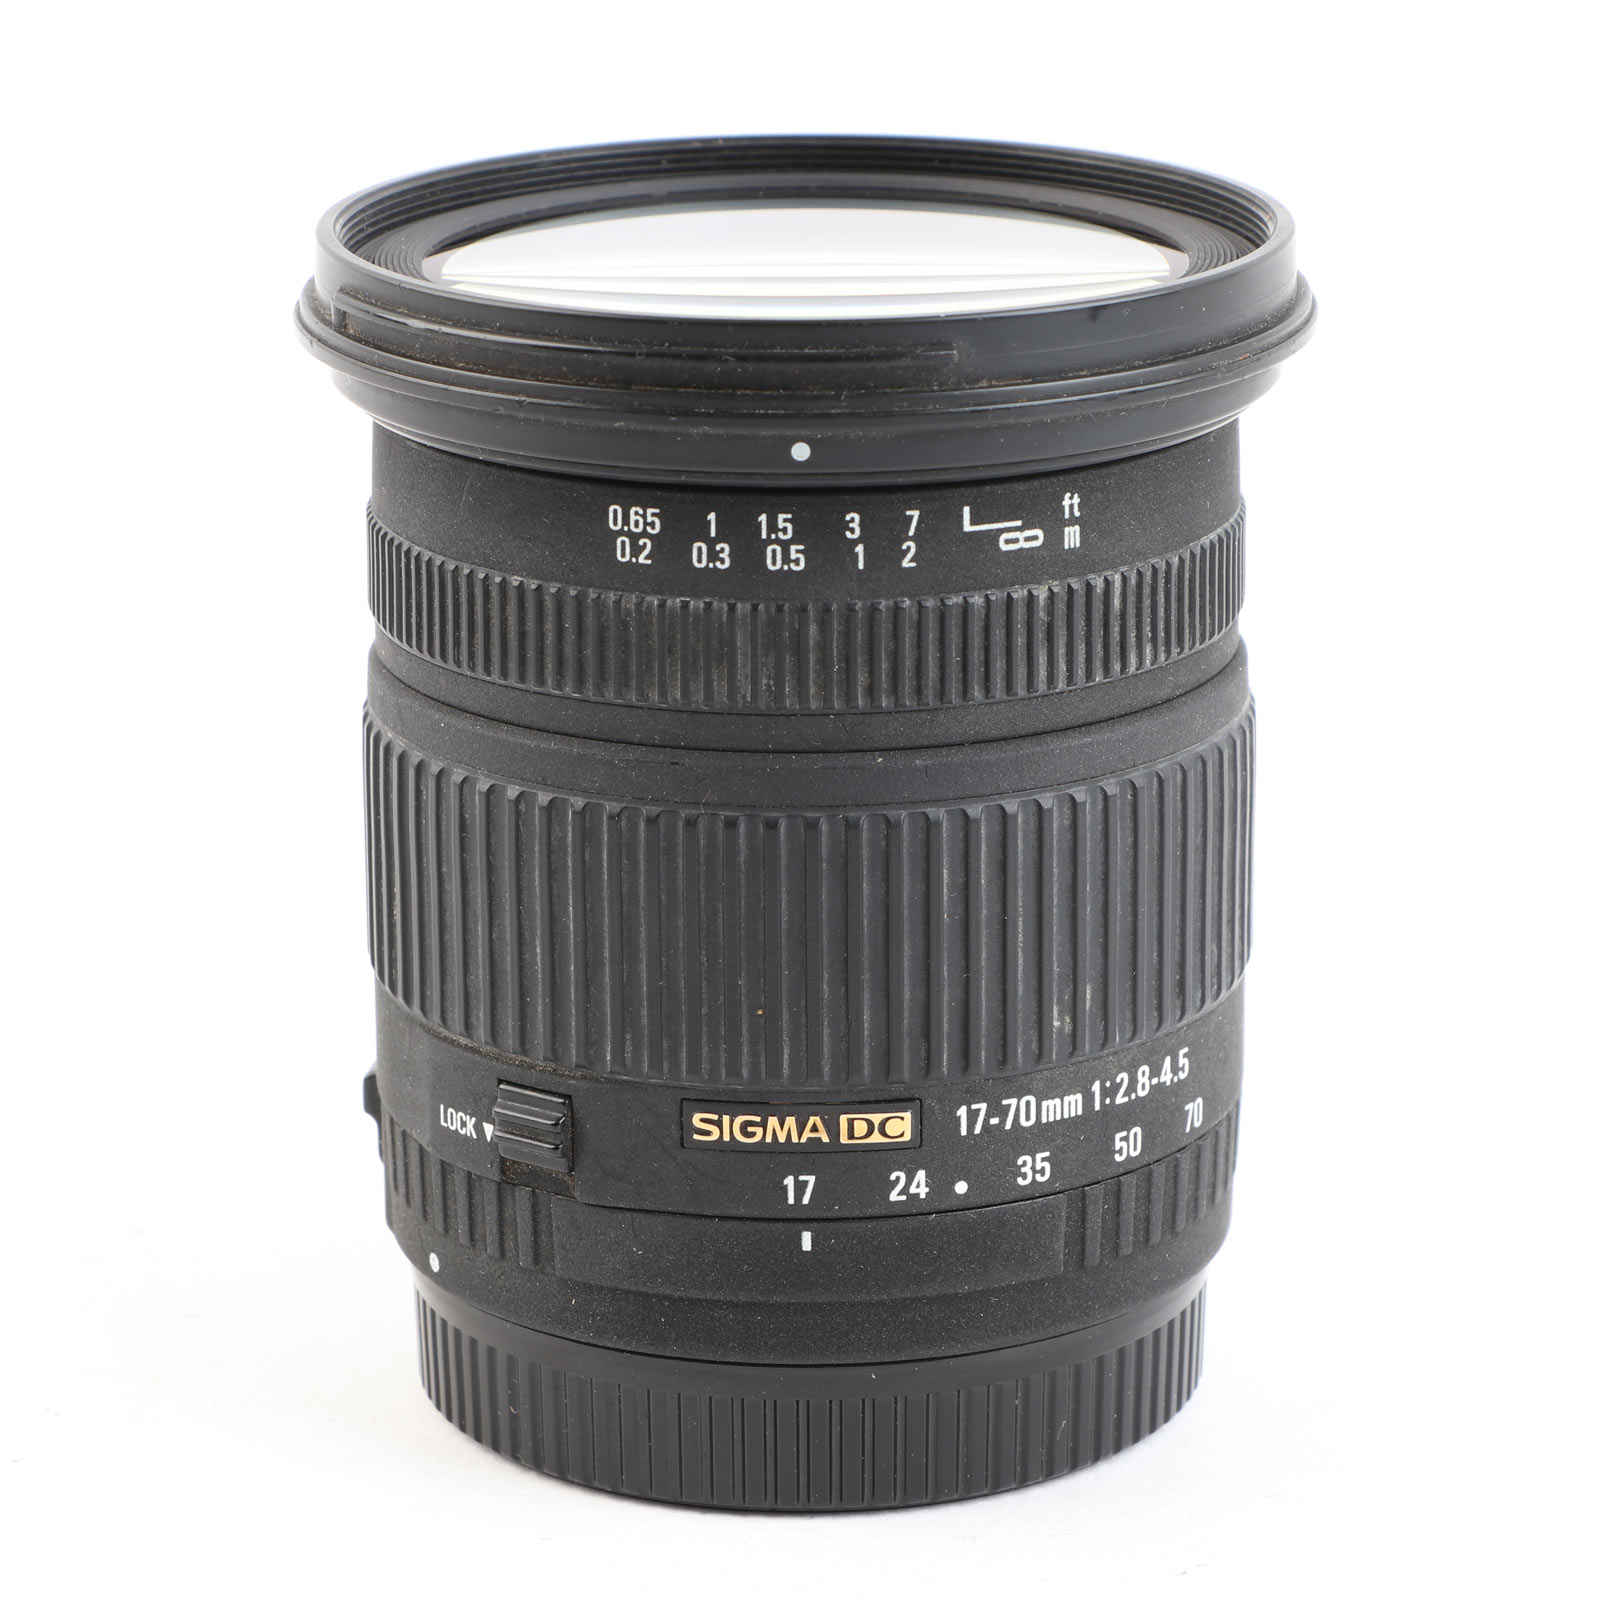 USED Sigma 17-70mm f2.8-4.5 DC Macro Lens - Canon Fit | Wex Photo